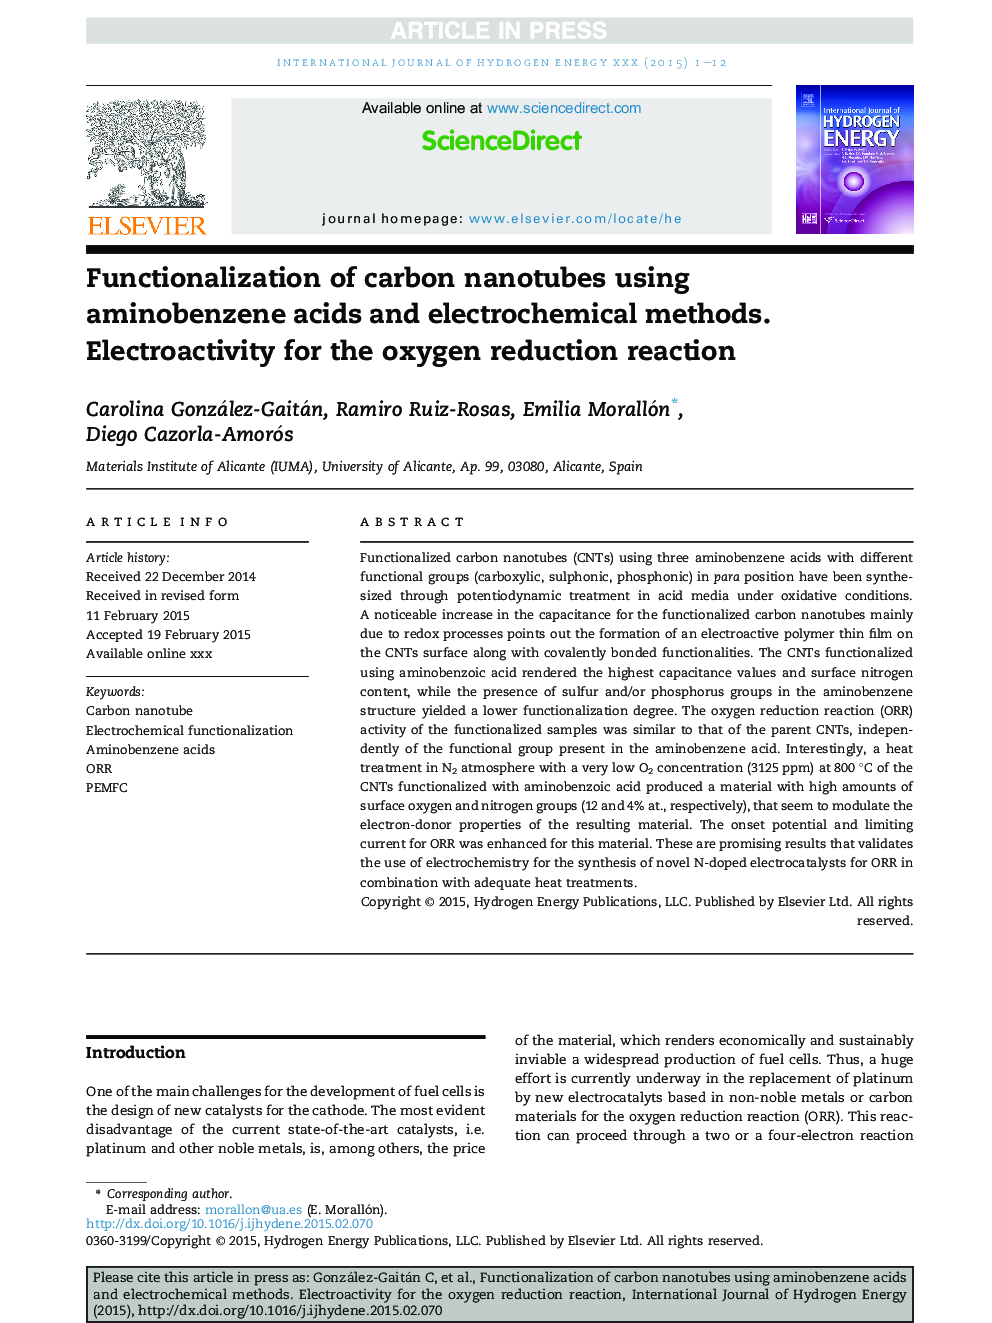 Functionalization of carbon nanotubes using aminobenzene acids and electrochemical methods. Electroactivity for the oxygen reduction reaction